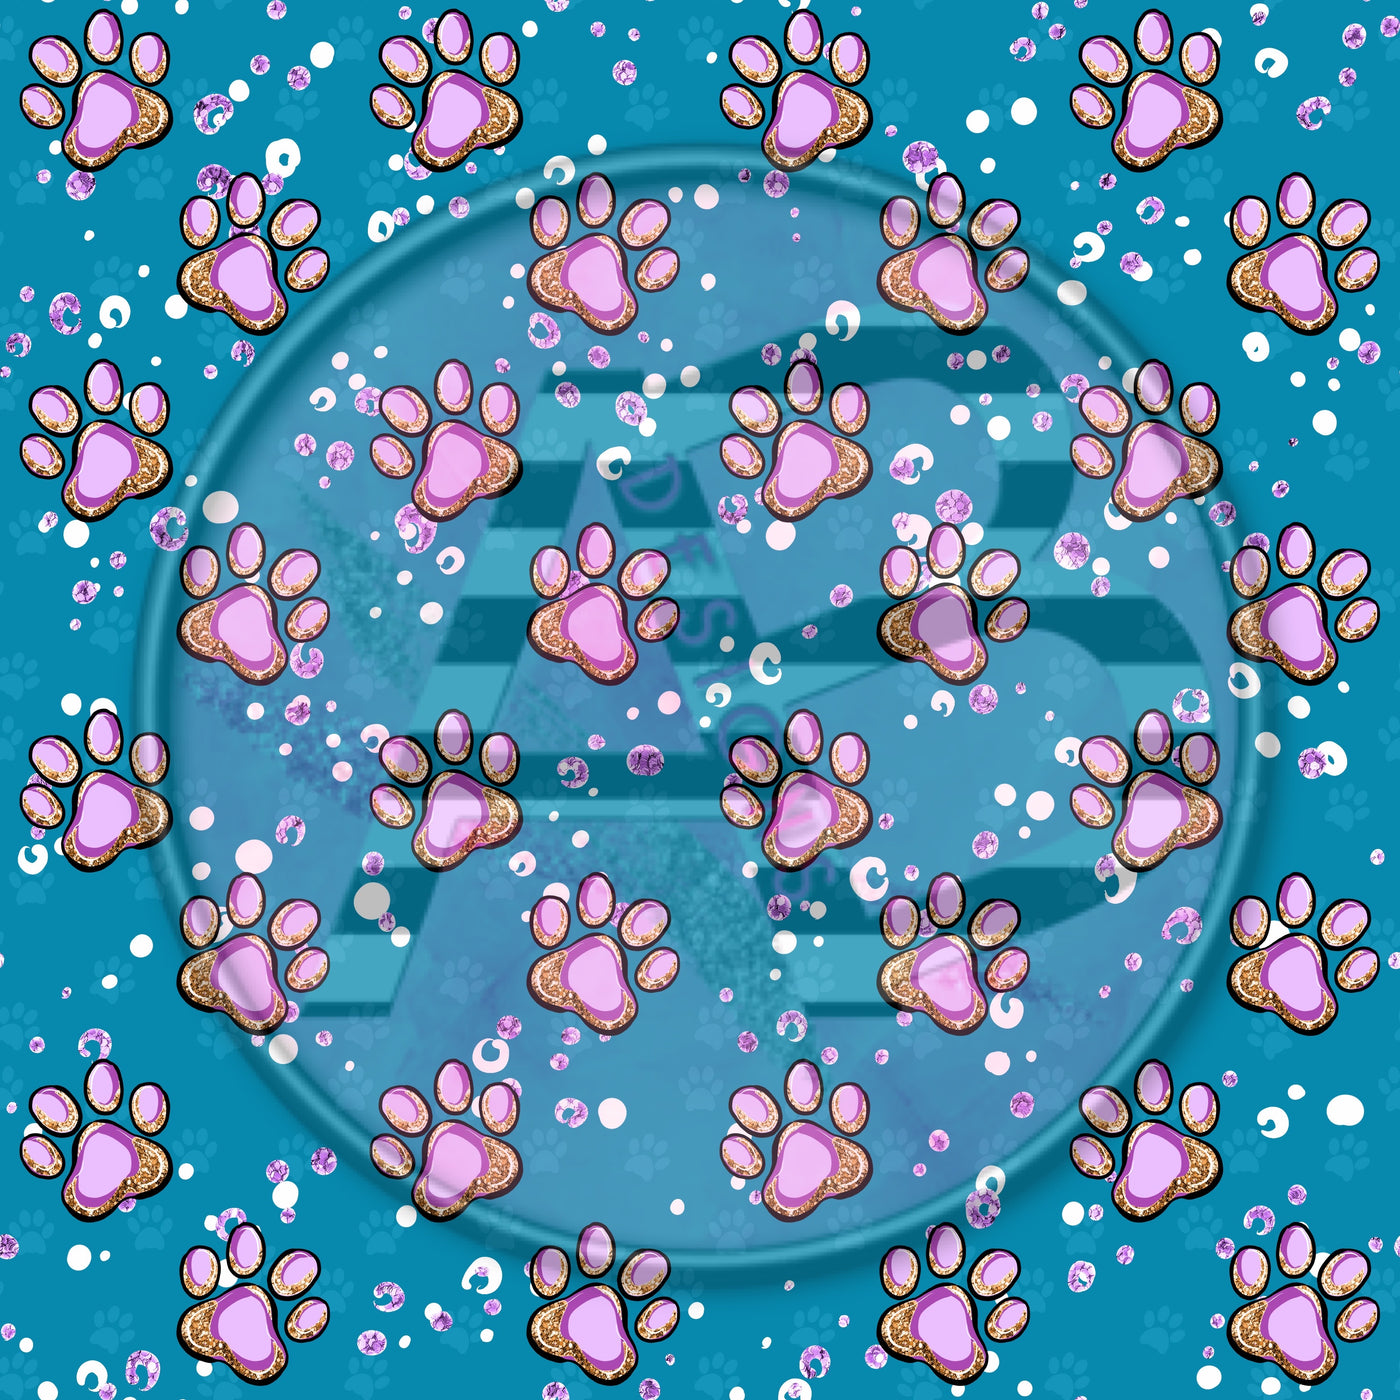 Adhesive Patterned Vinyl - Paws 223